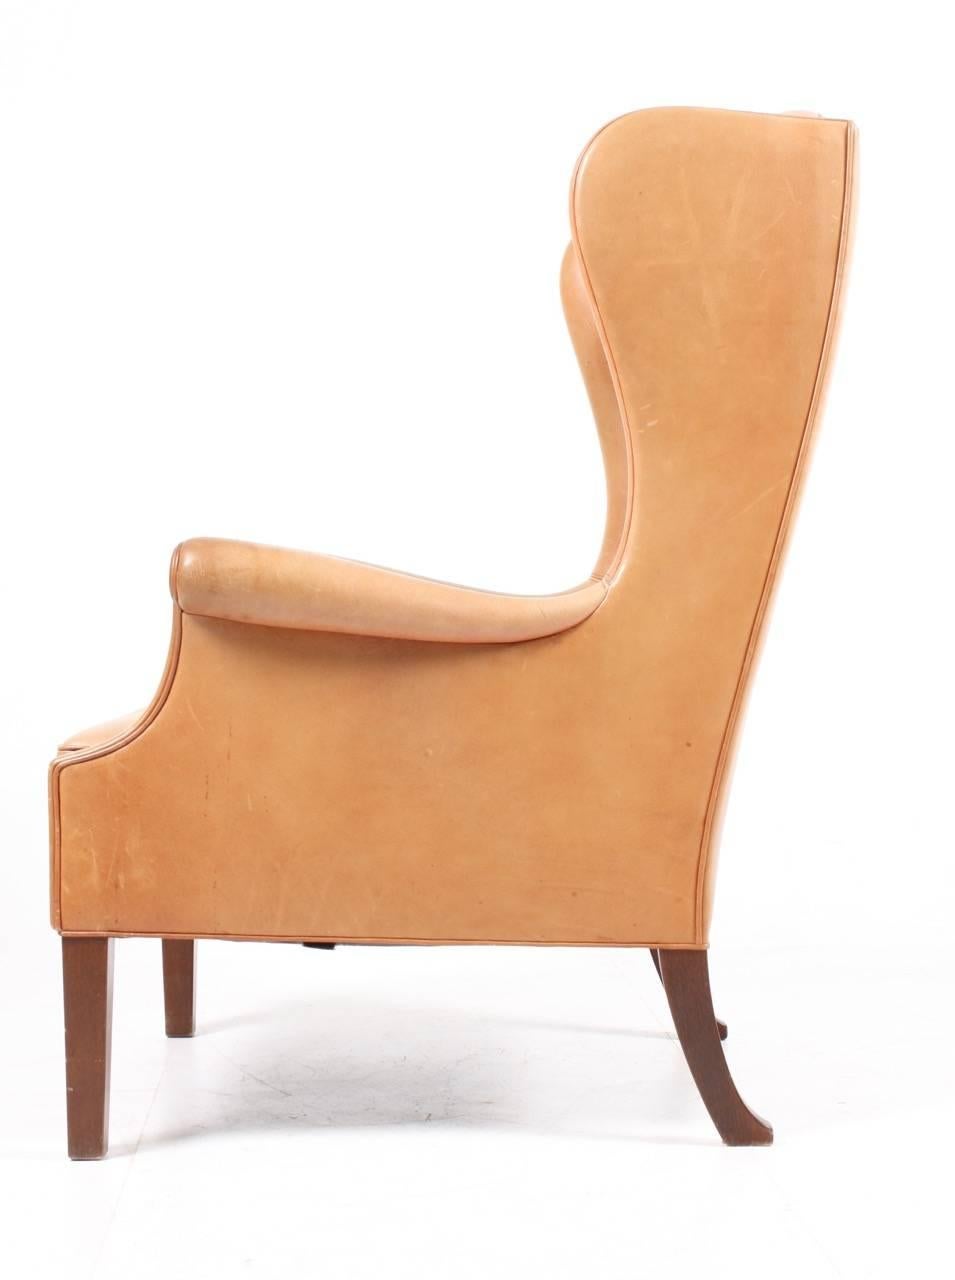 Mid-20th Century Wingback Chair in Leather